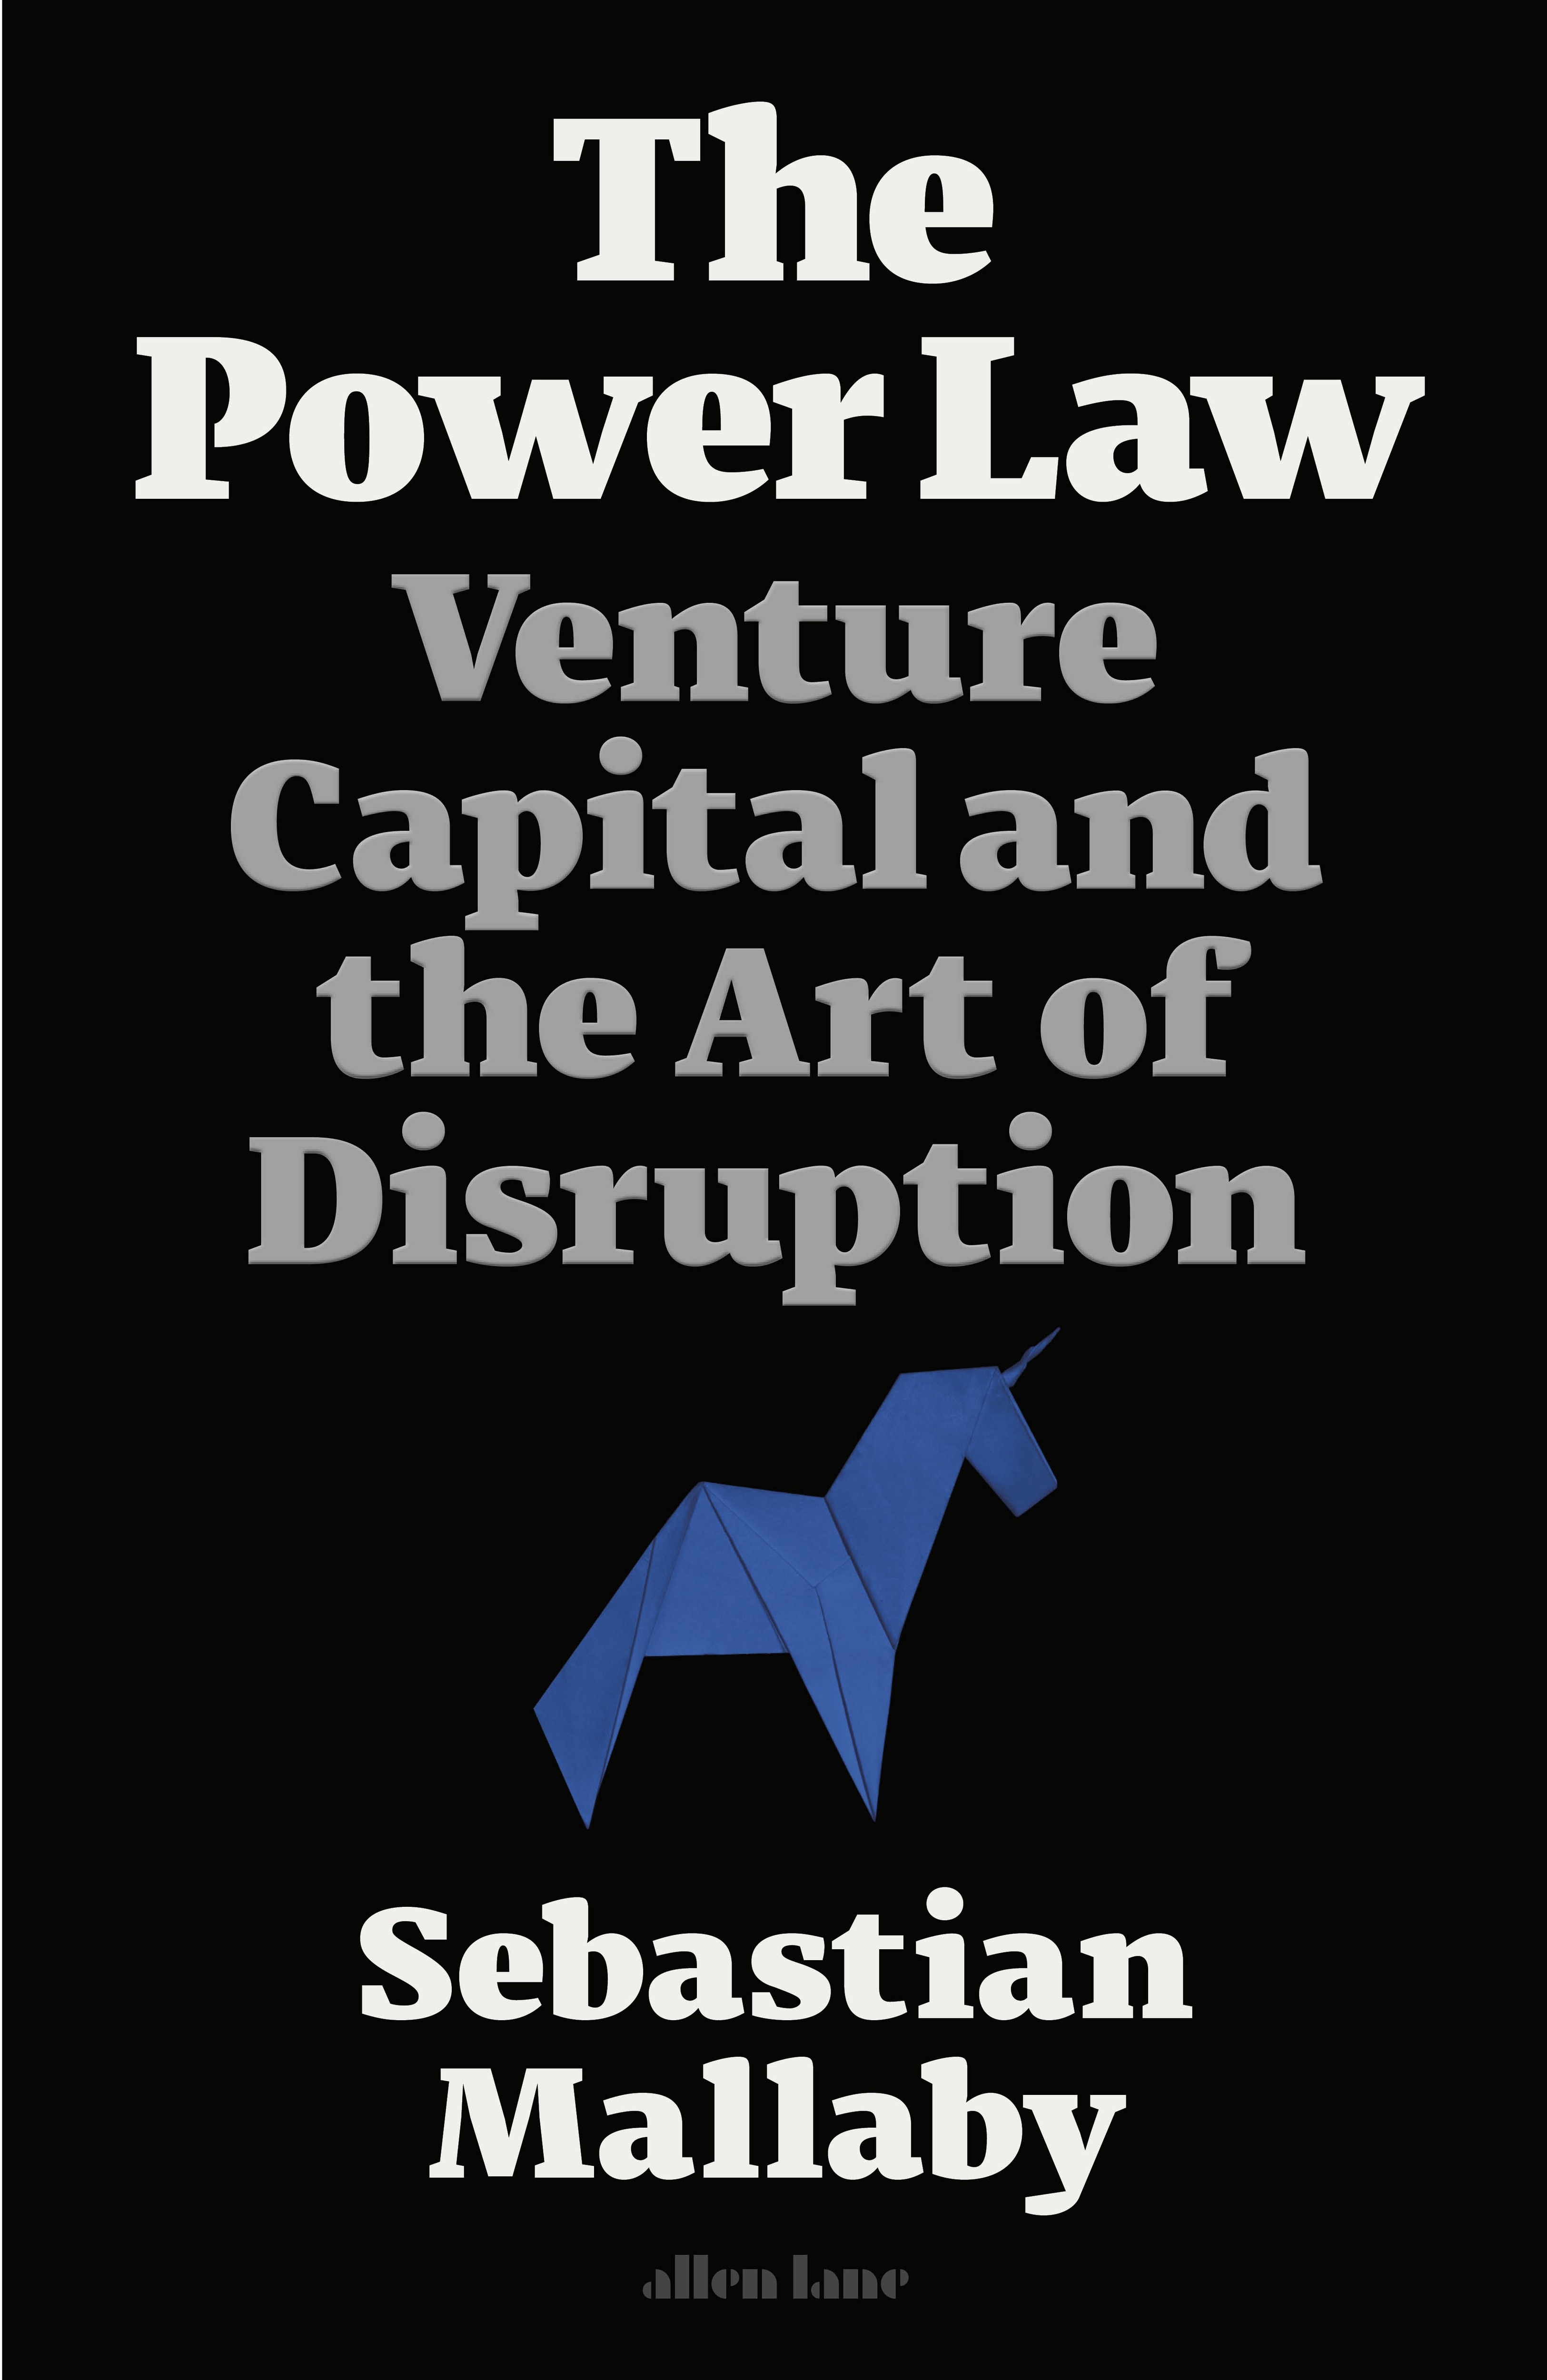 Book “The Power Law” by Sebastian Mallaby — January 25, 2022